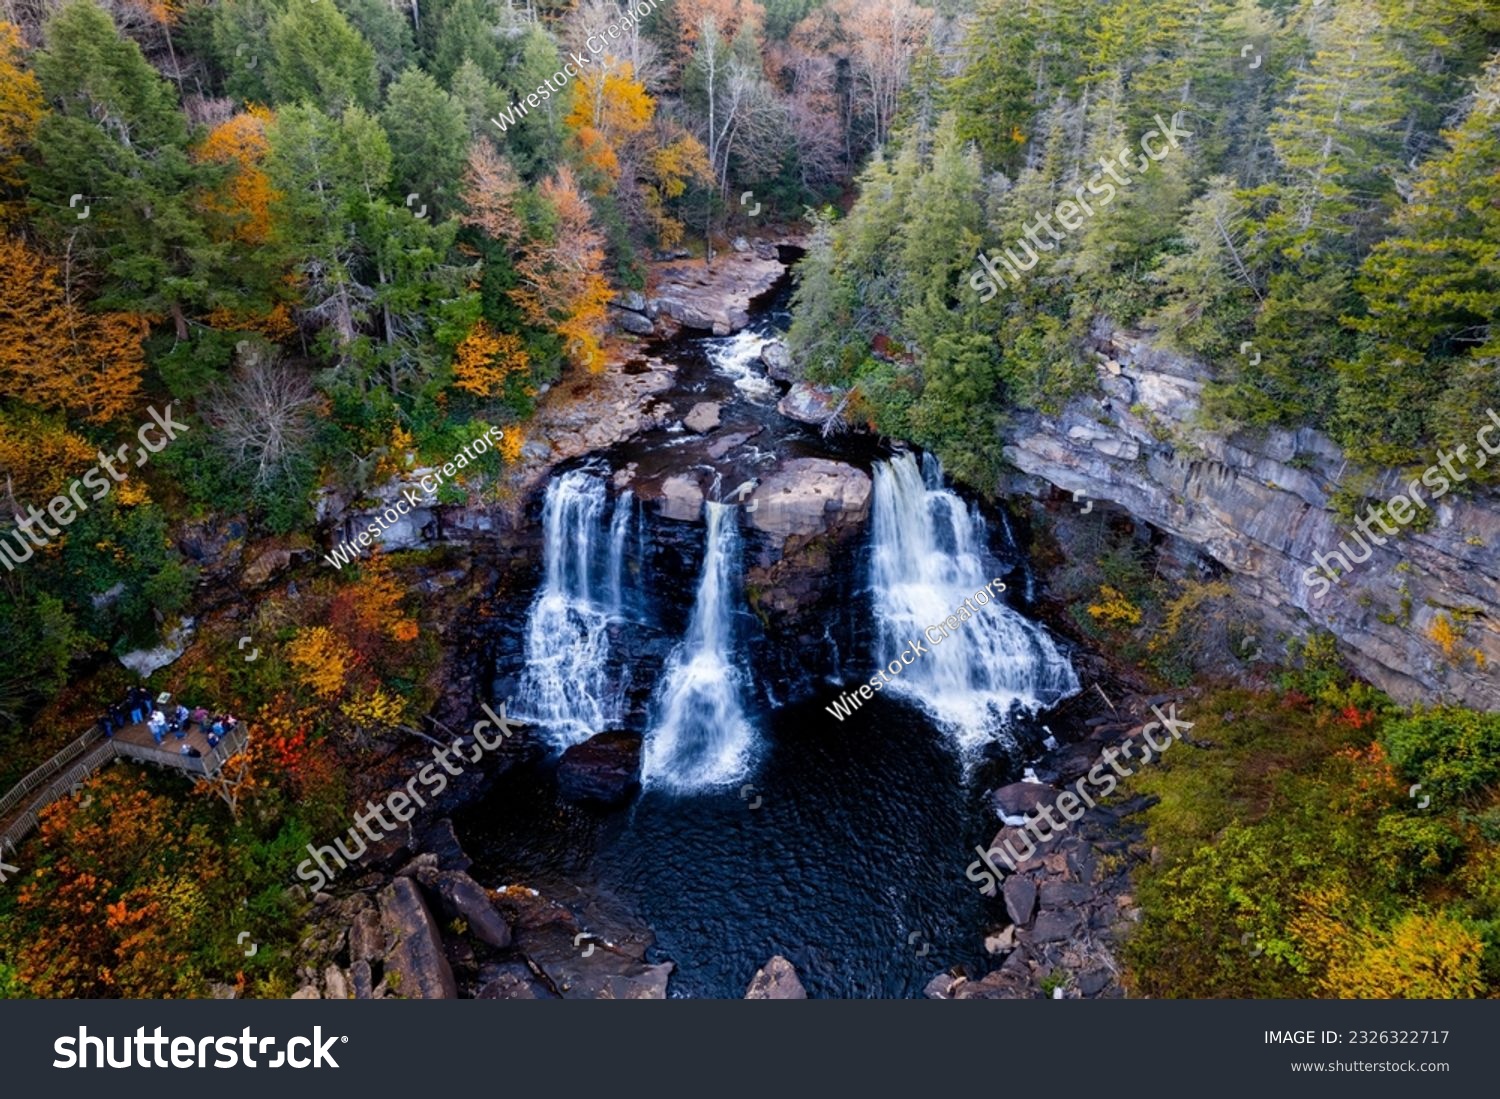 An aerial view of Blackwater Falls in a forest, Davis, West Virginia, United States #2326322717